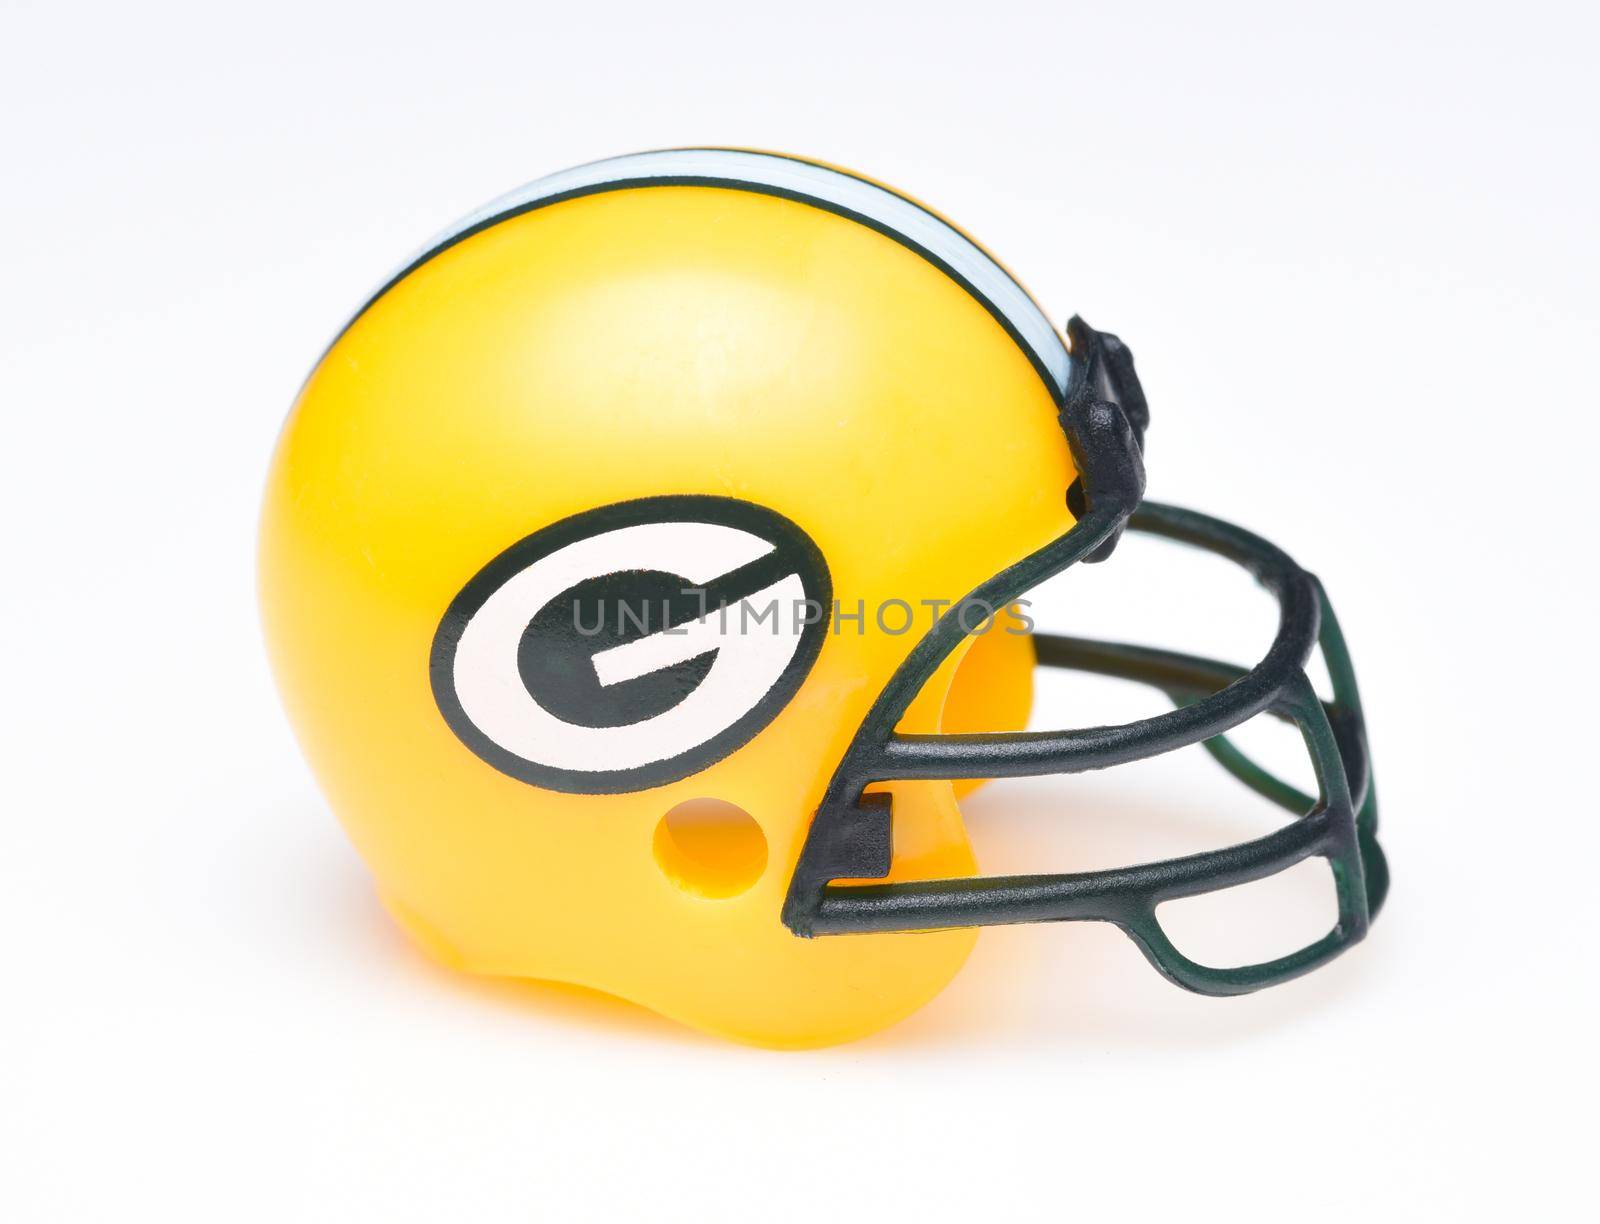 IRVINE, CALIFORNIA - AUGUST 30, 2018: Mini Collectable Football Helmet for the Green Bay Packers of the National Football Conference North.